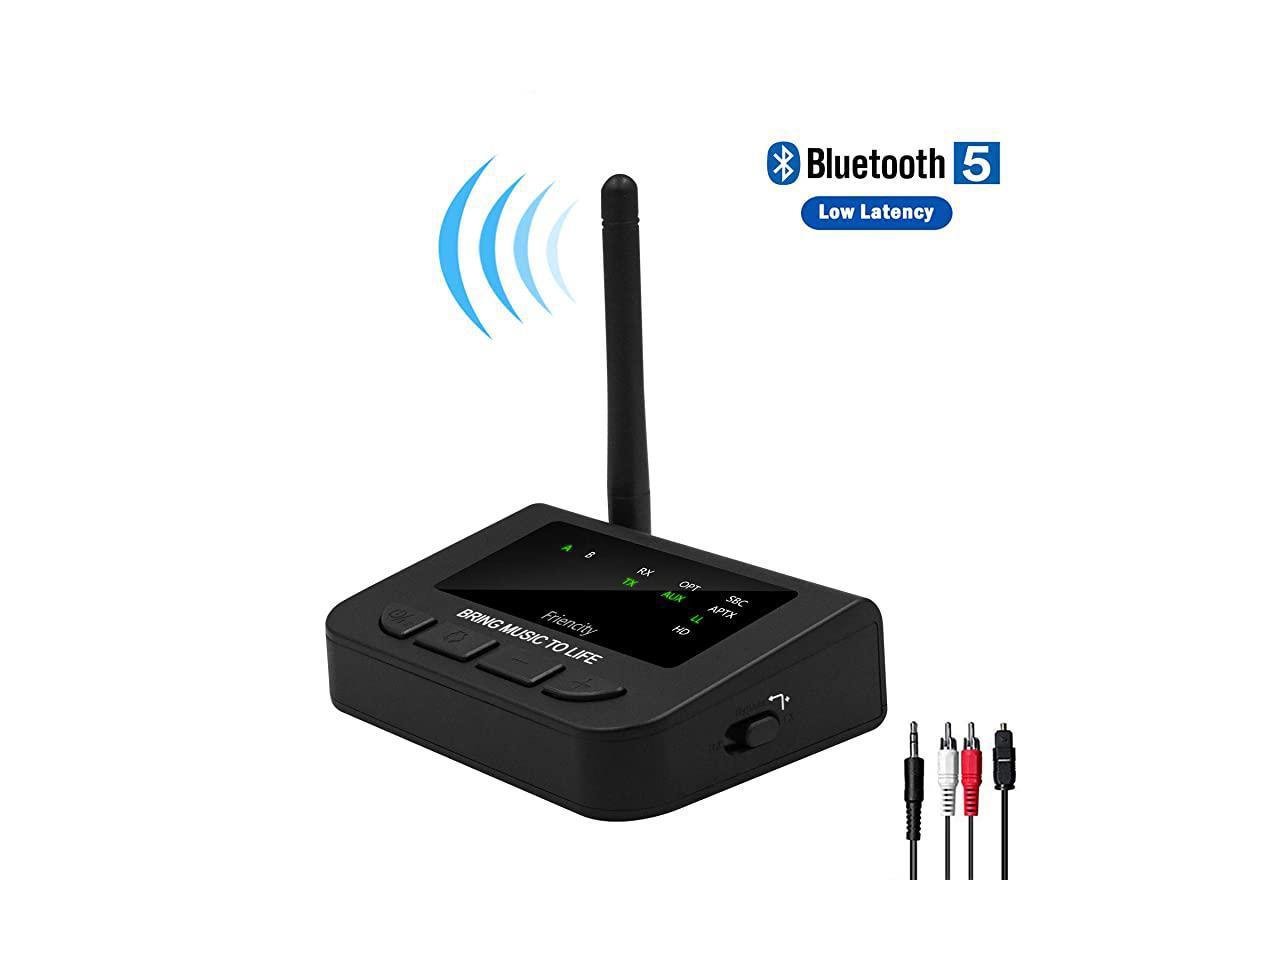 DIGMALL Long Range Bluetooth 5.0 Transmitter Receiver with Low Latency Digital Optical 3.5mm RCA AUX for TV PC PS4 Projector Home Stereo 3 in 1 Wireless Audio Adapter Dual Link with Audio Pass-Thru 